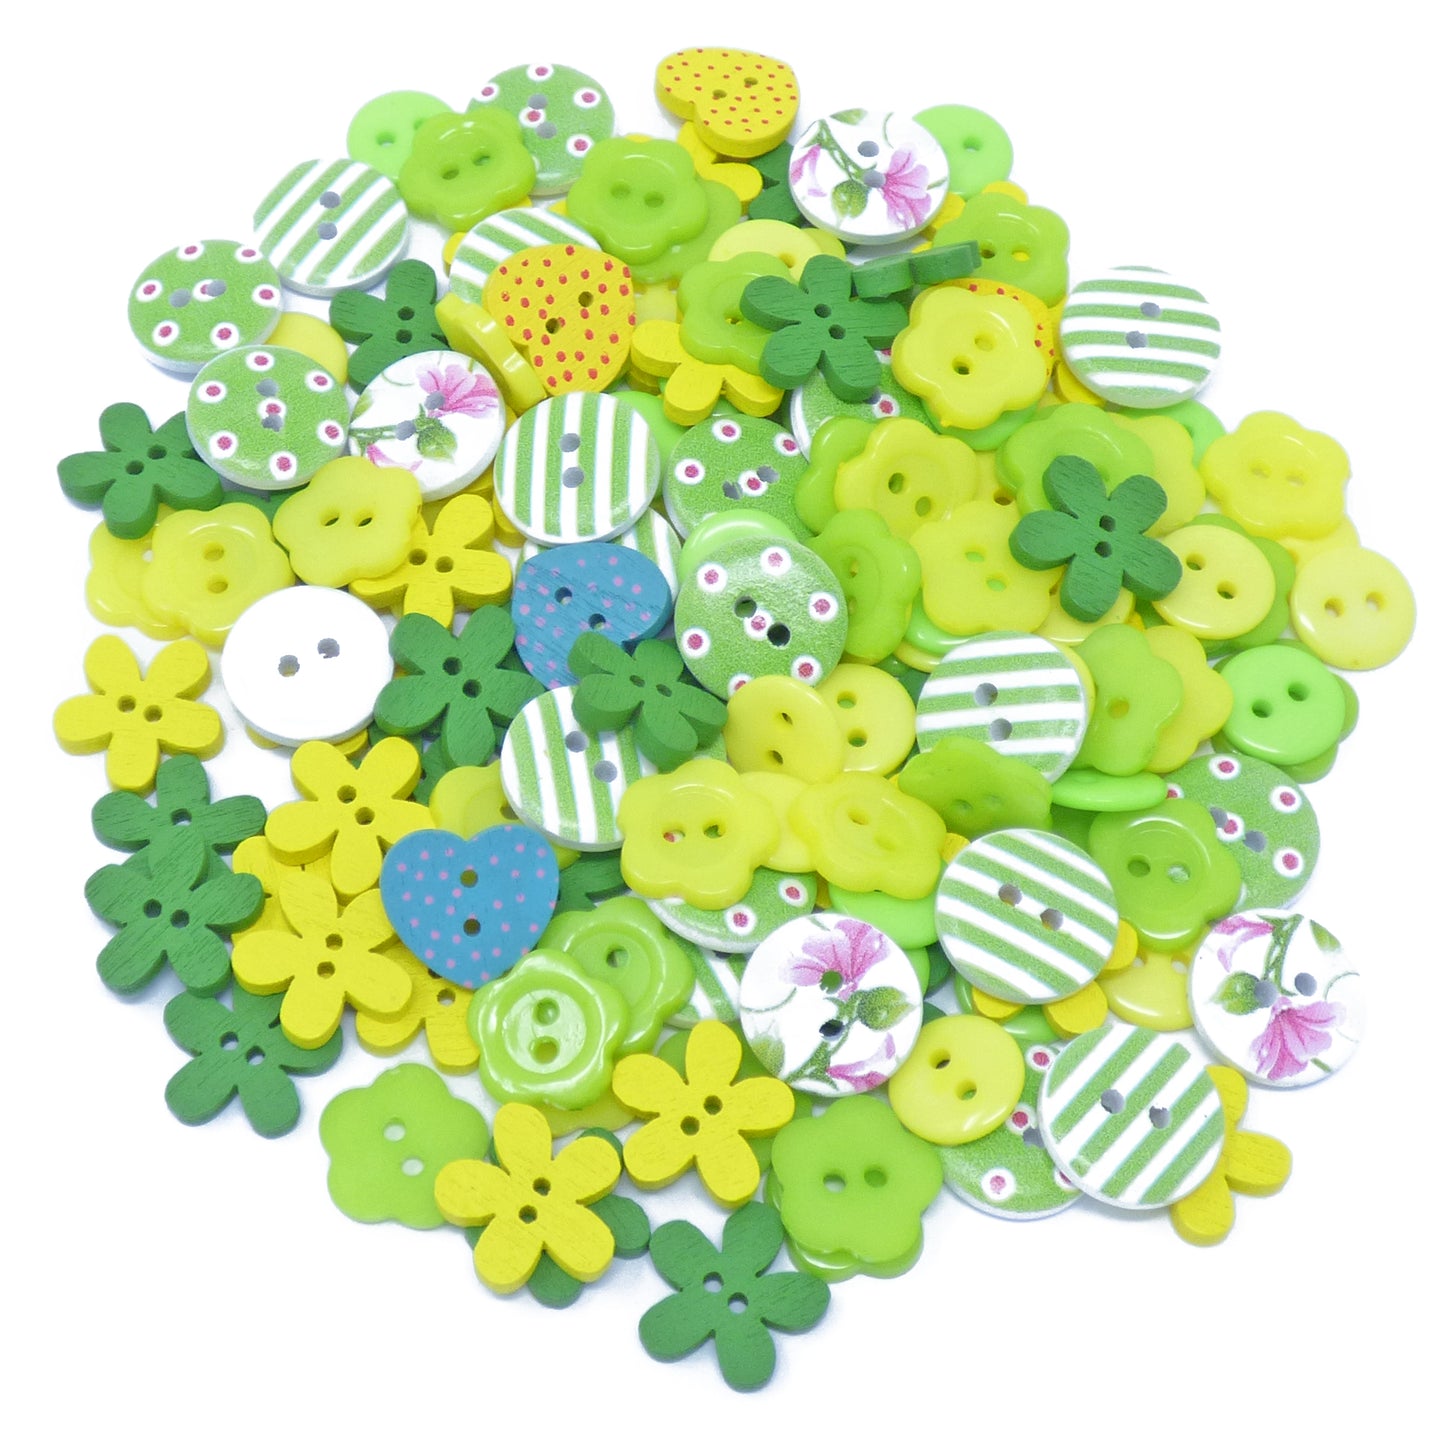 Green/Yellow 150 Mix Wood Acrylic & Resin Buttons